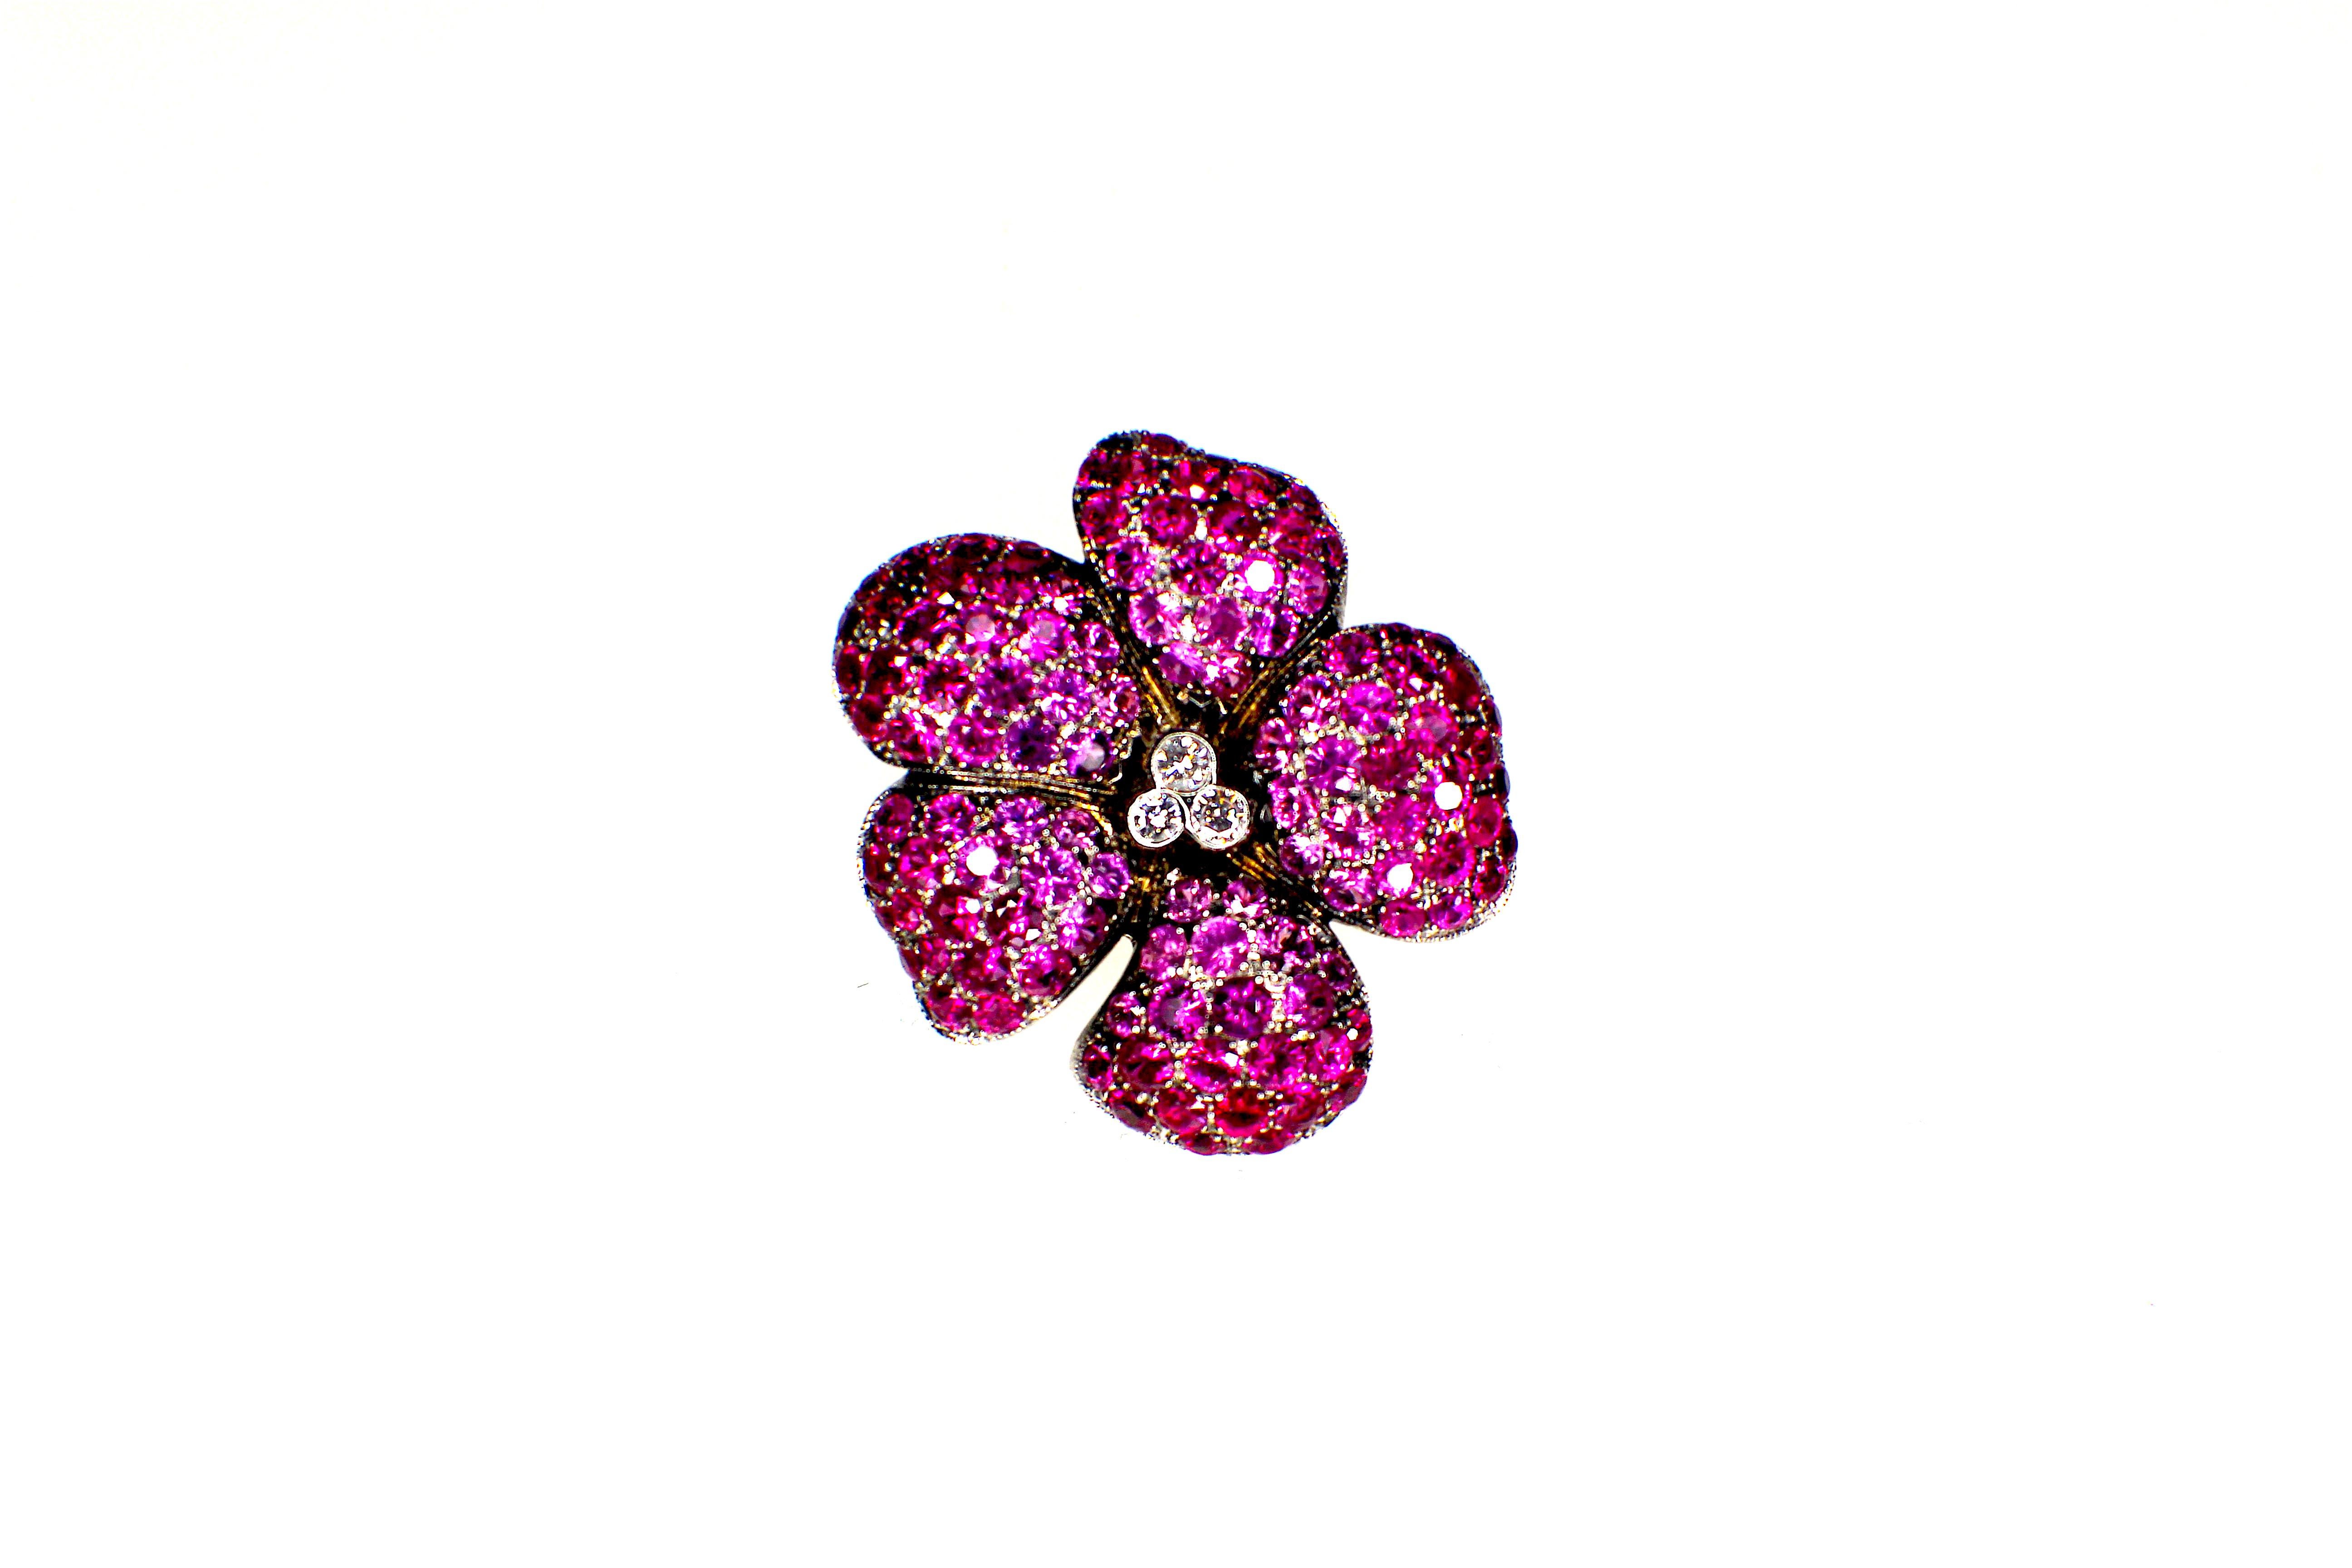 GEMOLITHOS Ruby, pink sapphire and diamond Brooch - 18 Karat Gold, 
Diam.: 0.20 ct G/VS 
Ruby-Pink Sapphires : circa 8.0ct very clean No inclusions visible.  nice color transaction in total. 
Size: 2.9 cm diameter. 